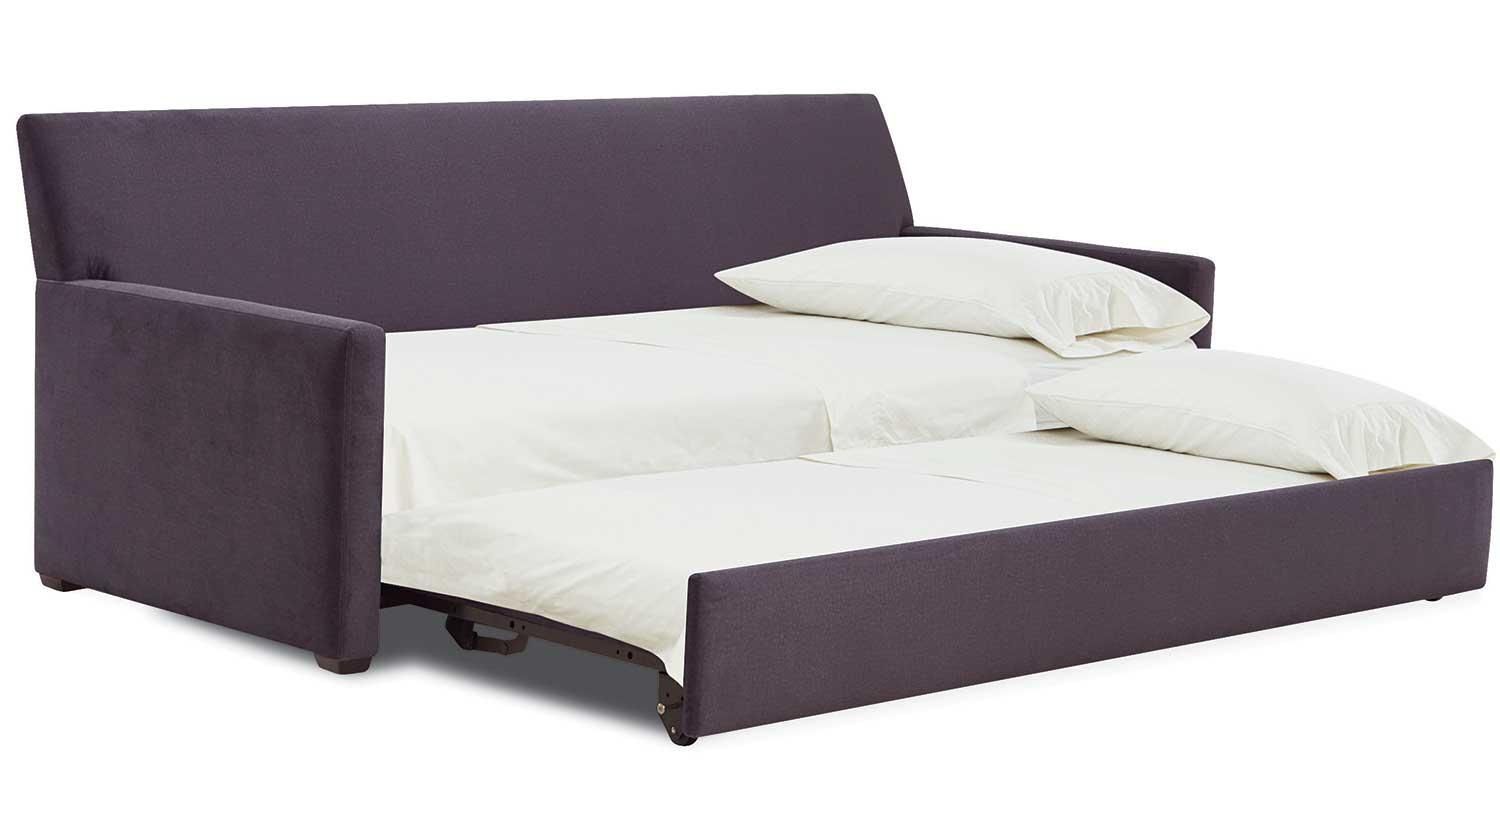 Circle Furniture – Austin Sleeper | Converitable Beds | Sofa Beds Throughout Austin Sleeper Sofas (View 1 of 20)